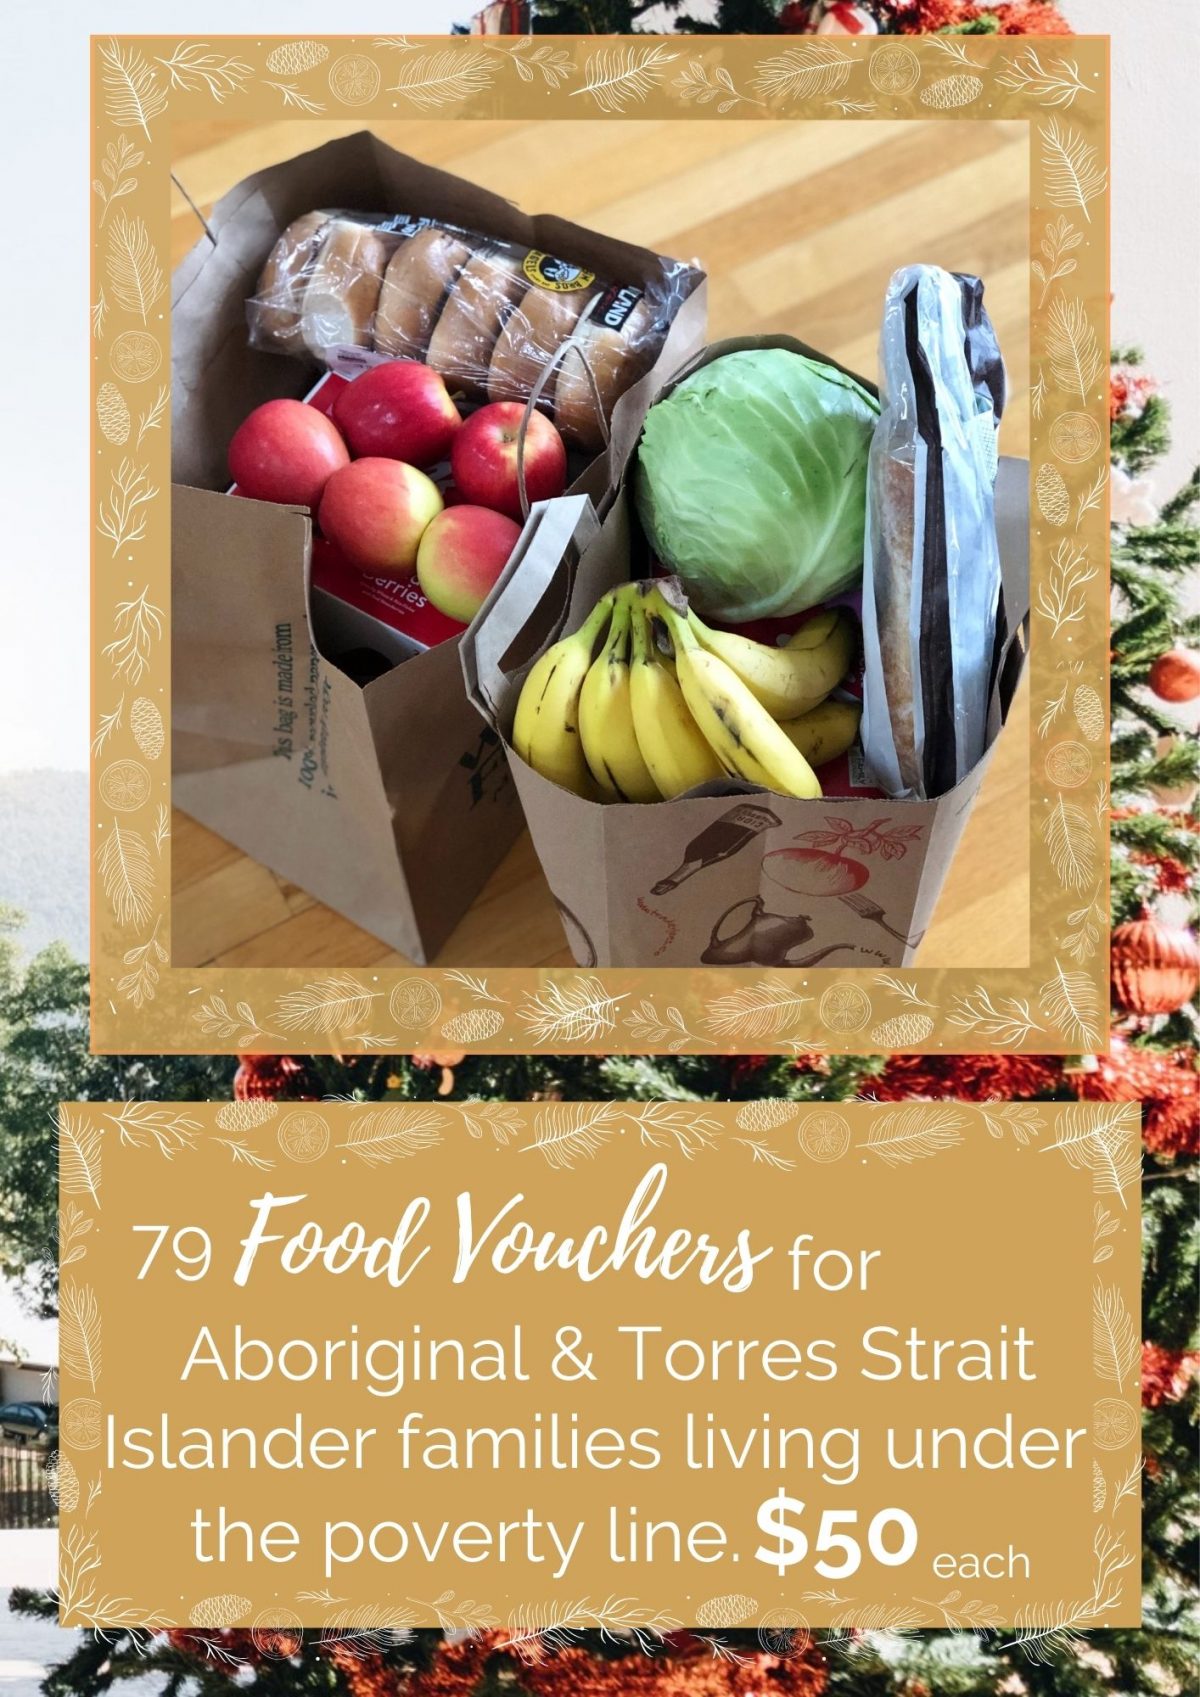 79 Food Vouchers for Aboriginal and Torres Strait Islander families living under the poverty line. $50 each